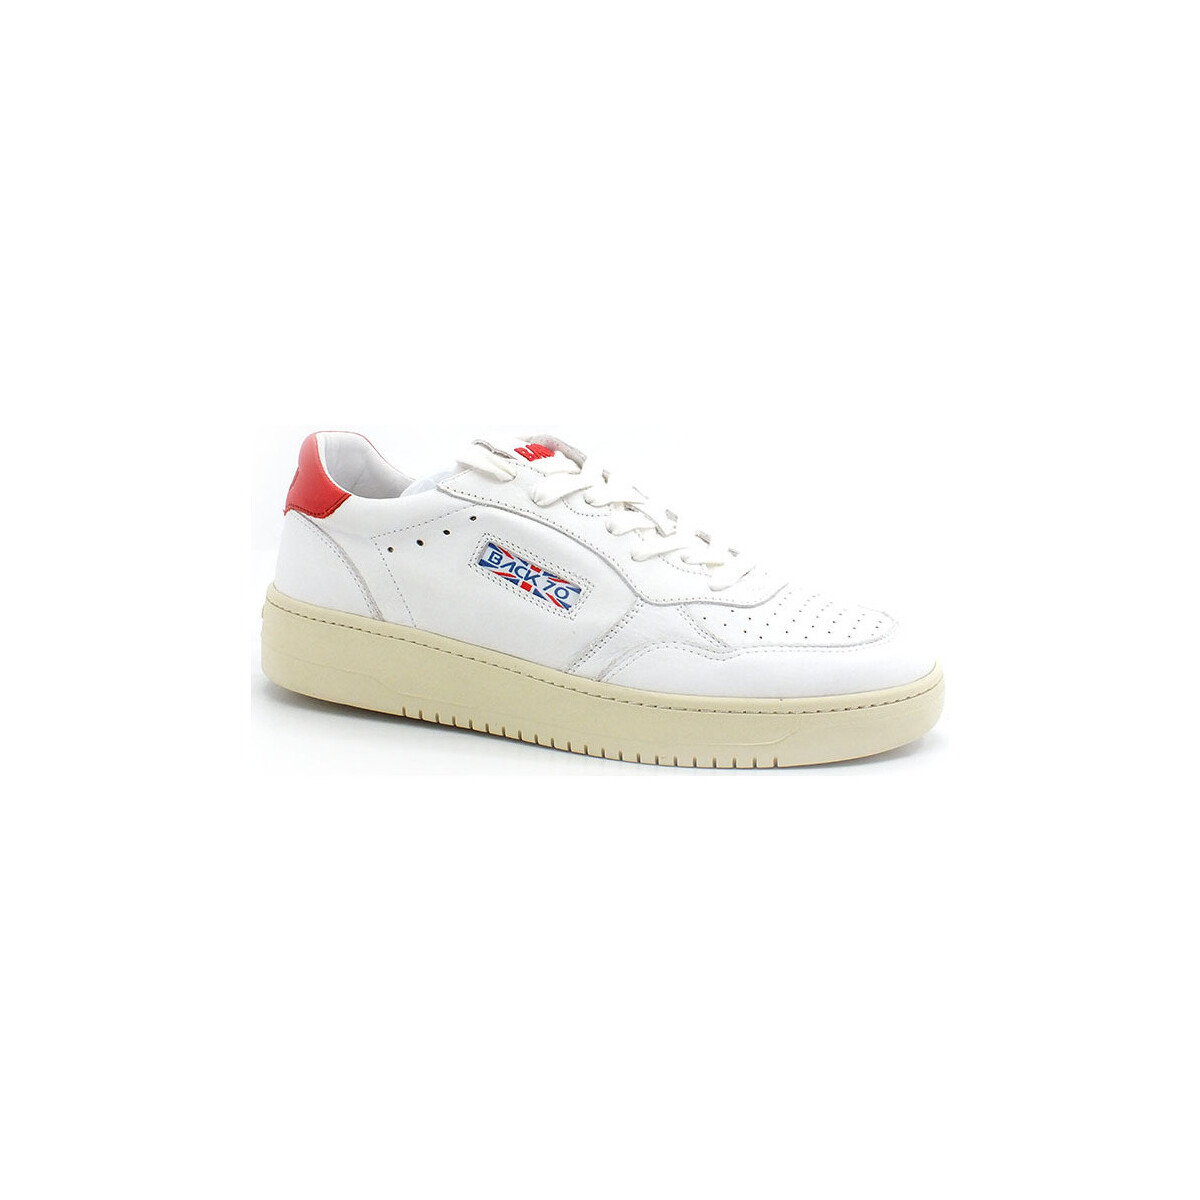 Chaussures Homme zapatillas de running mujer pie cavo talla 48.5 azules BACK70 Sneaker Slam 7D Cow Pelle Milk Red 108002 Blanc